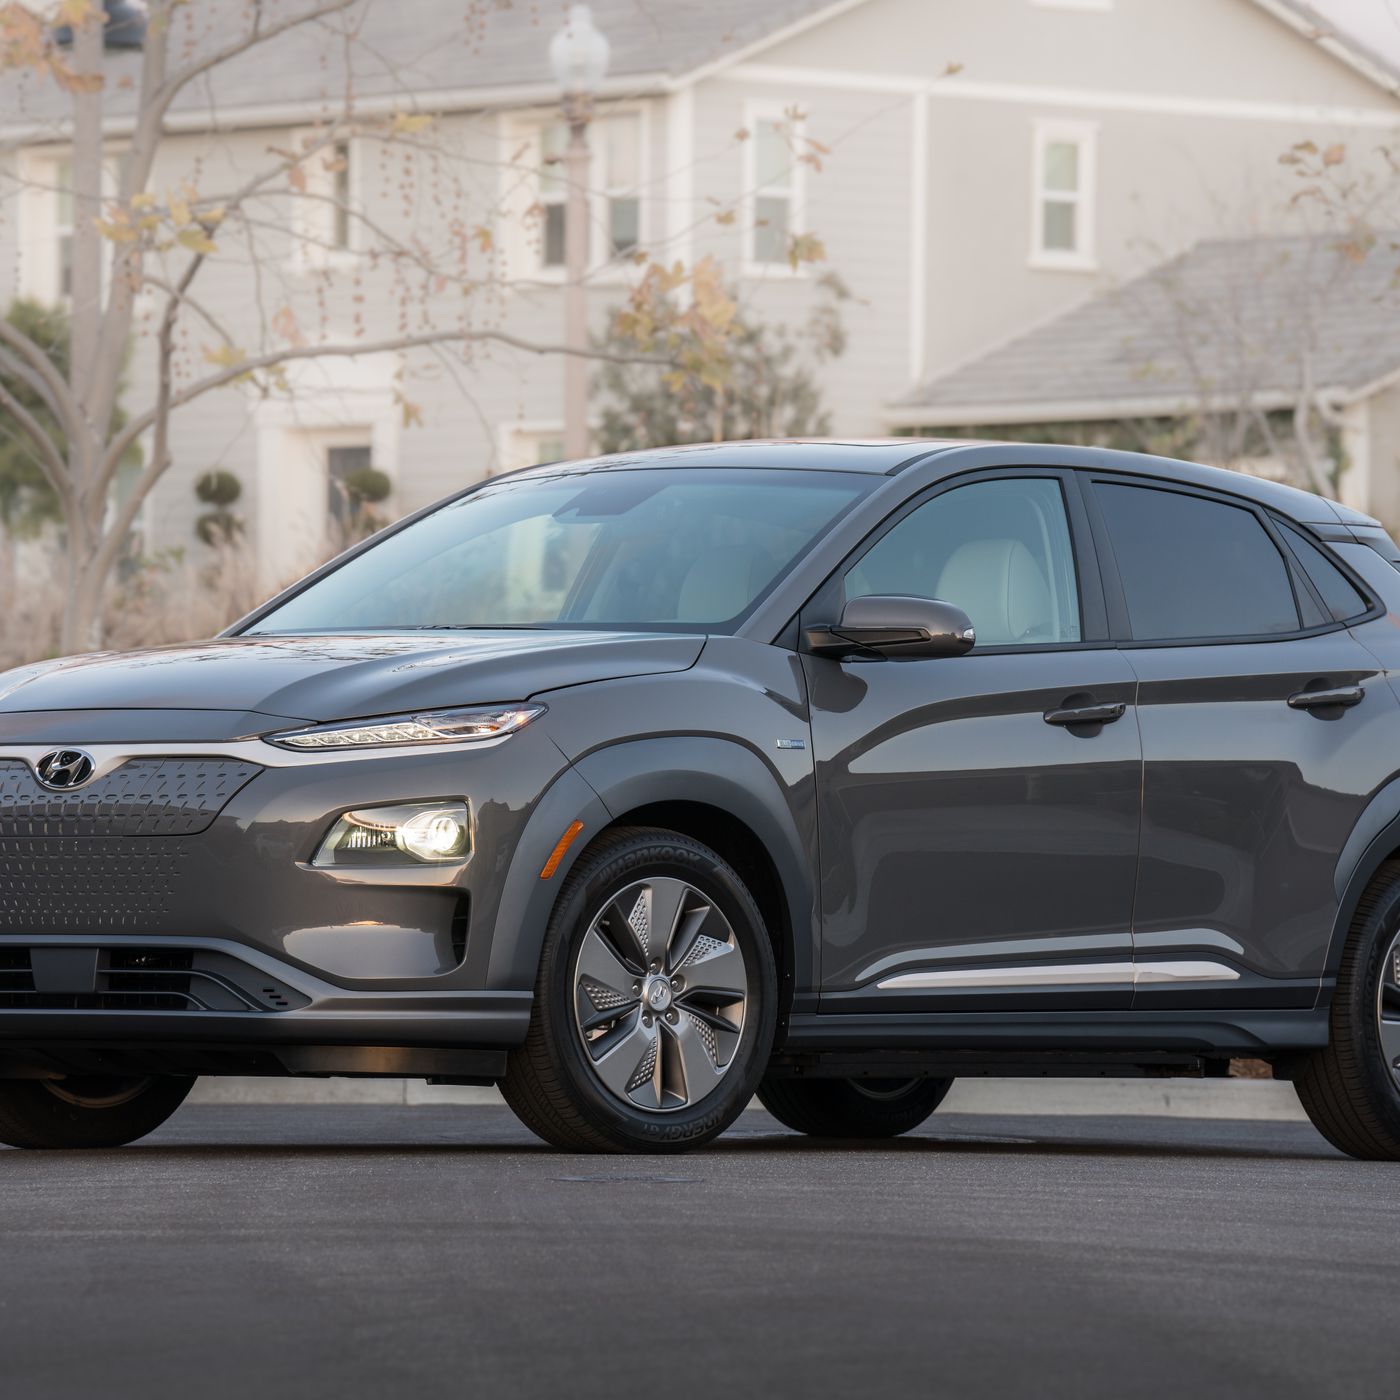 Hyundai's Kona EV has great range and costs as much as the average ...